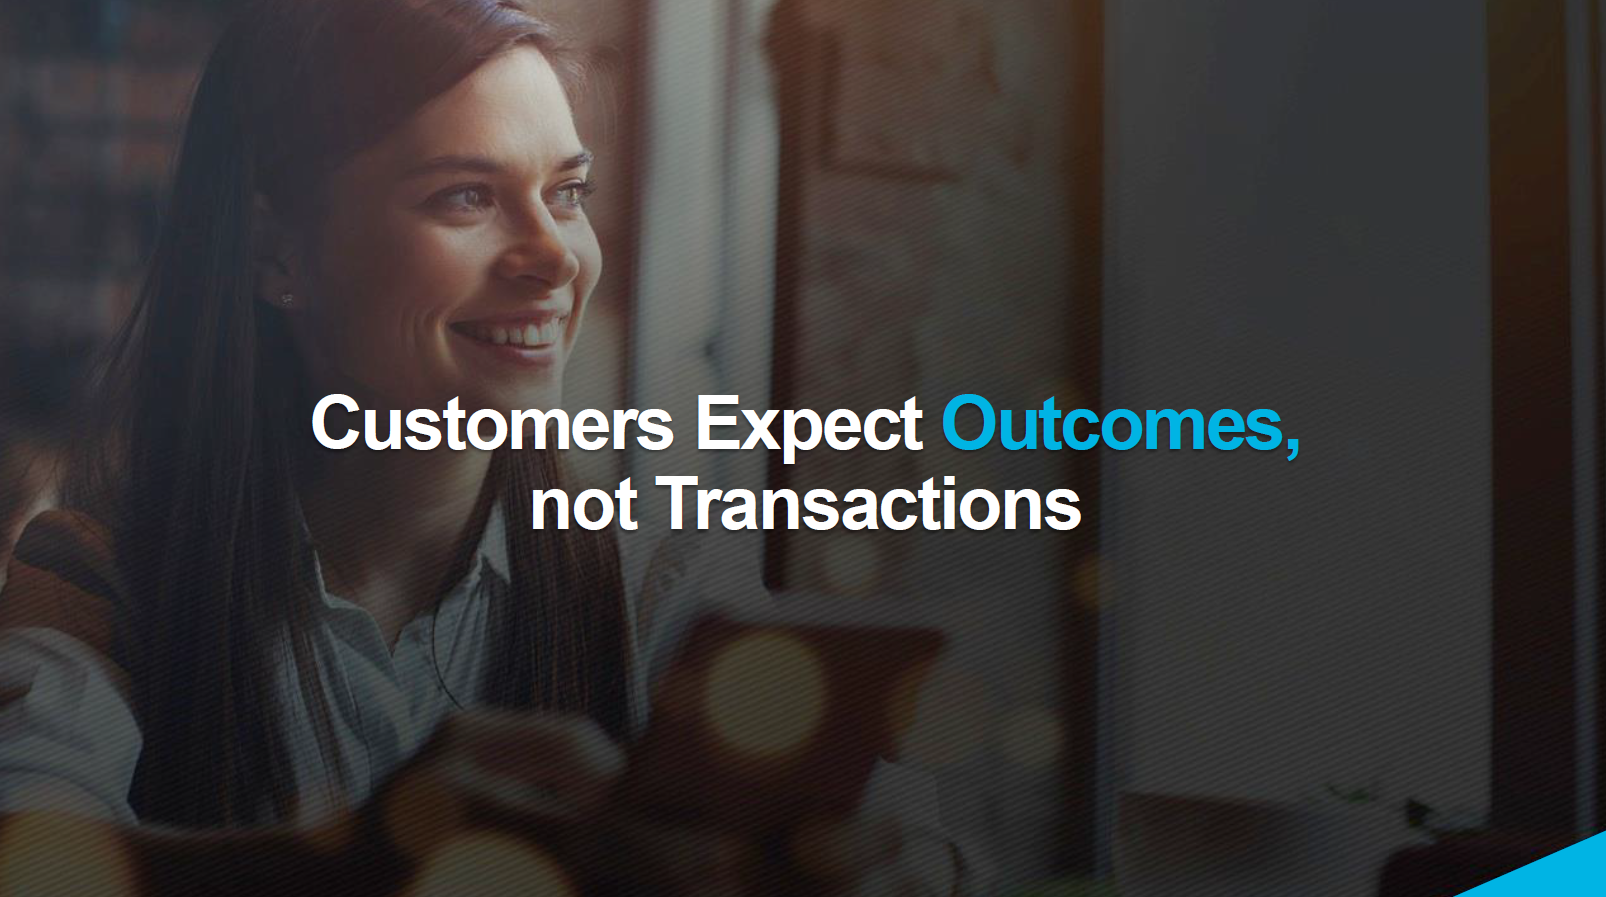 Customers expect outcomes not transactions